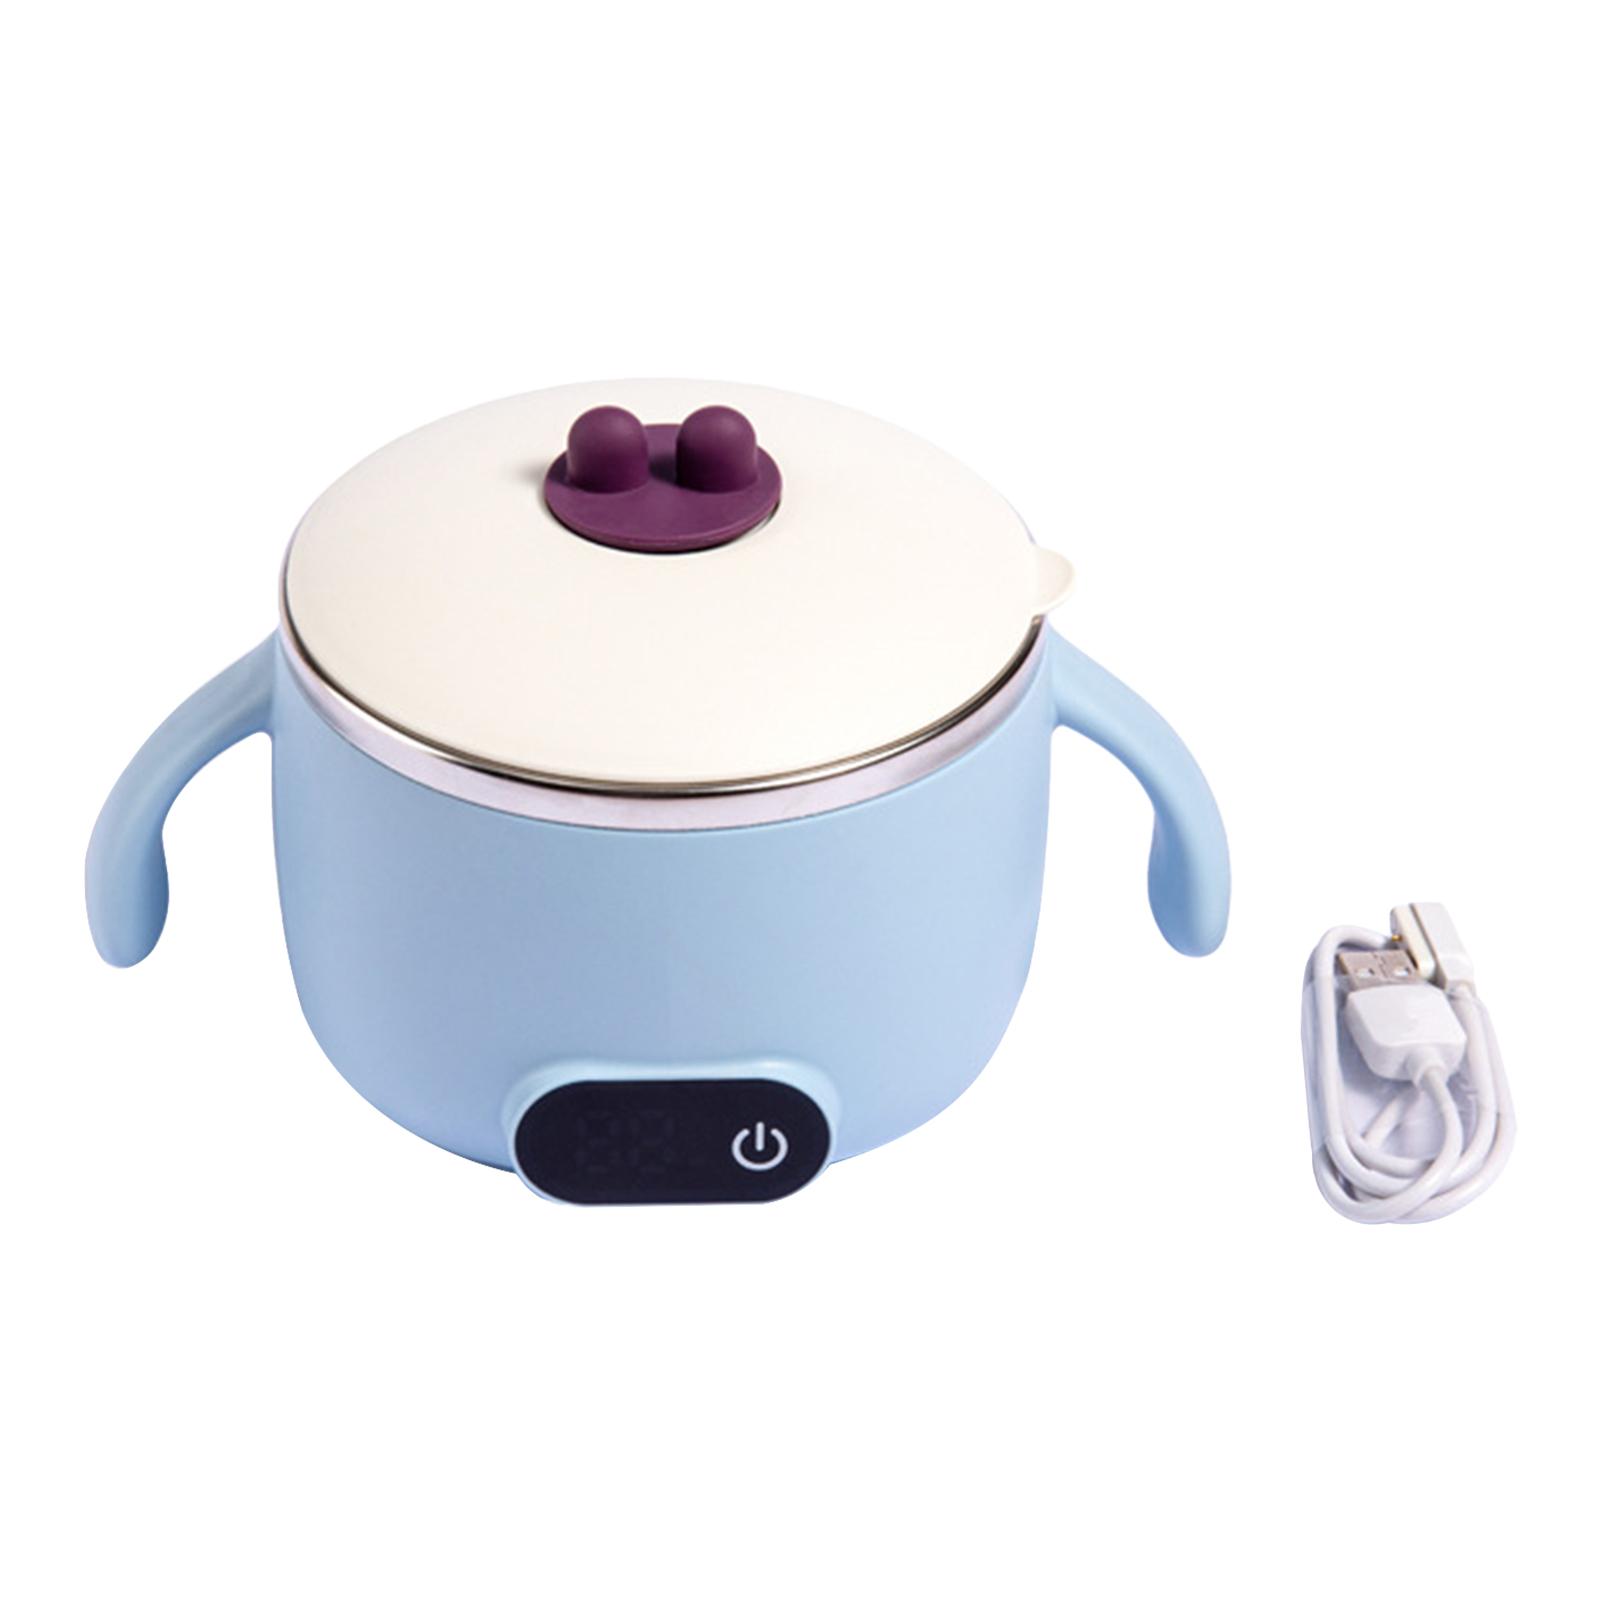 Kids Heating Feeding Bowl With Lid Thermal Insulated Baby Smart Electric Bowl USB Rechargeable Stainless Steel Tableware